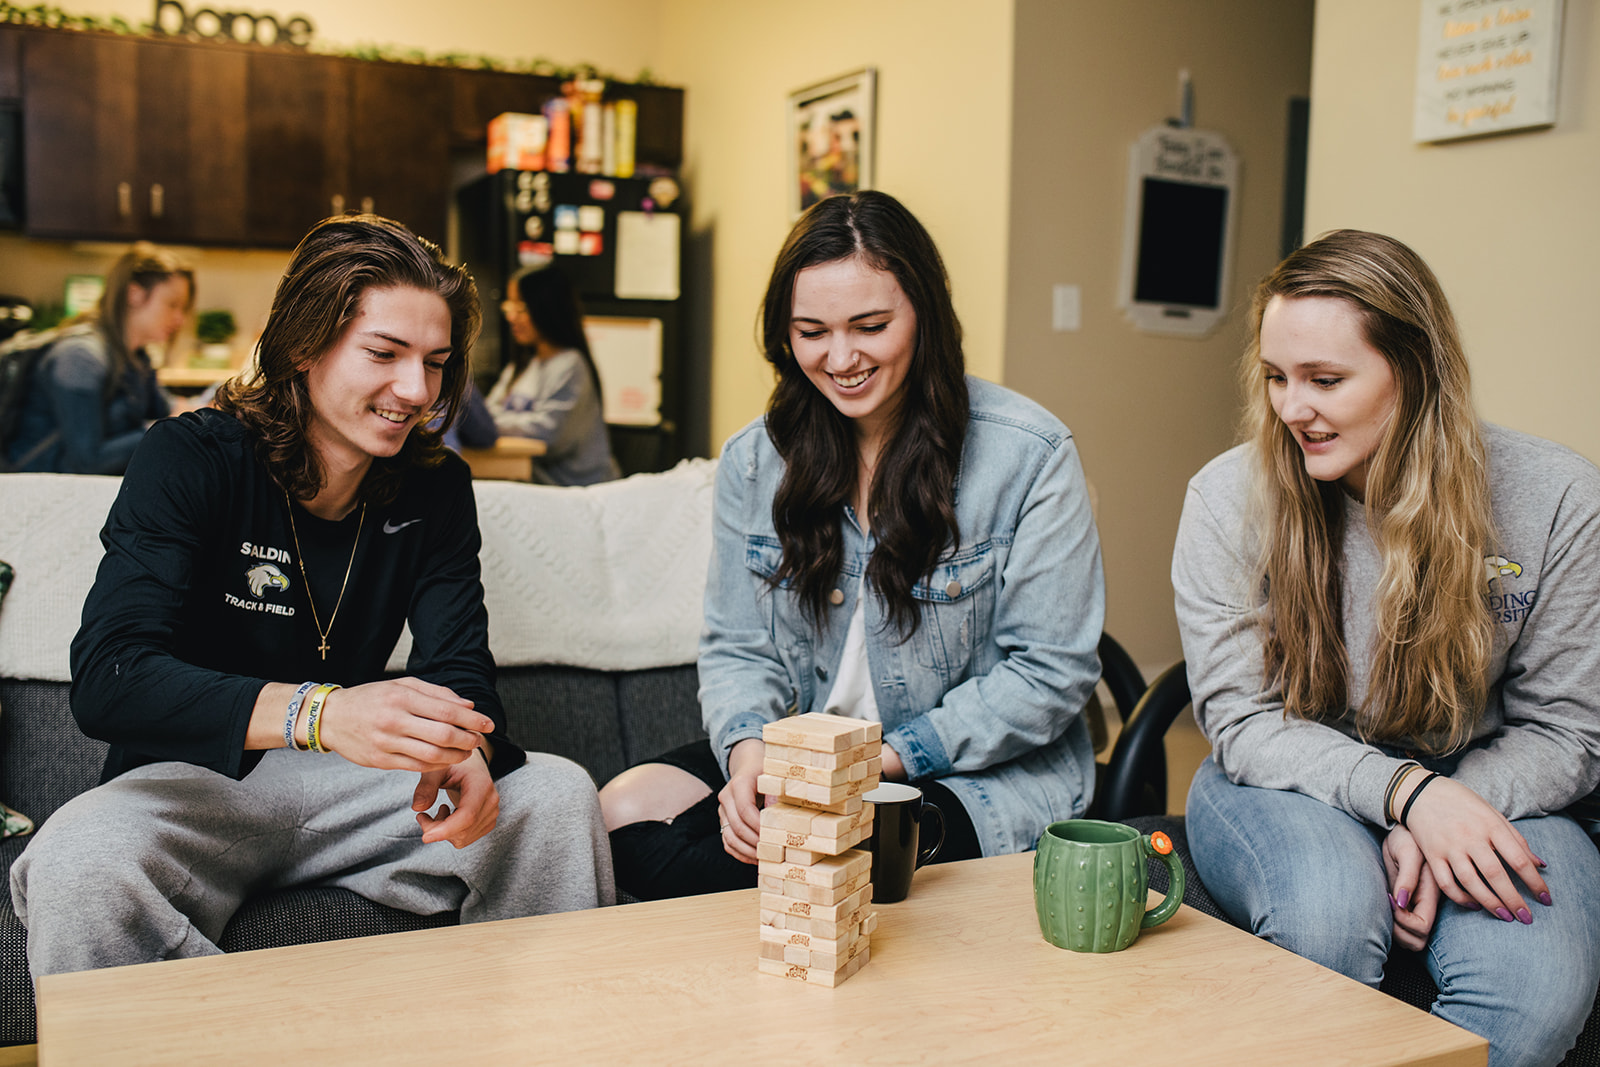 Students play tower game in Spalding Suites residence hall.